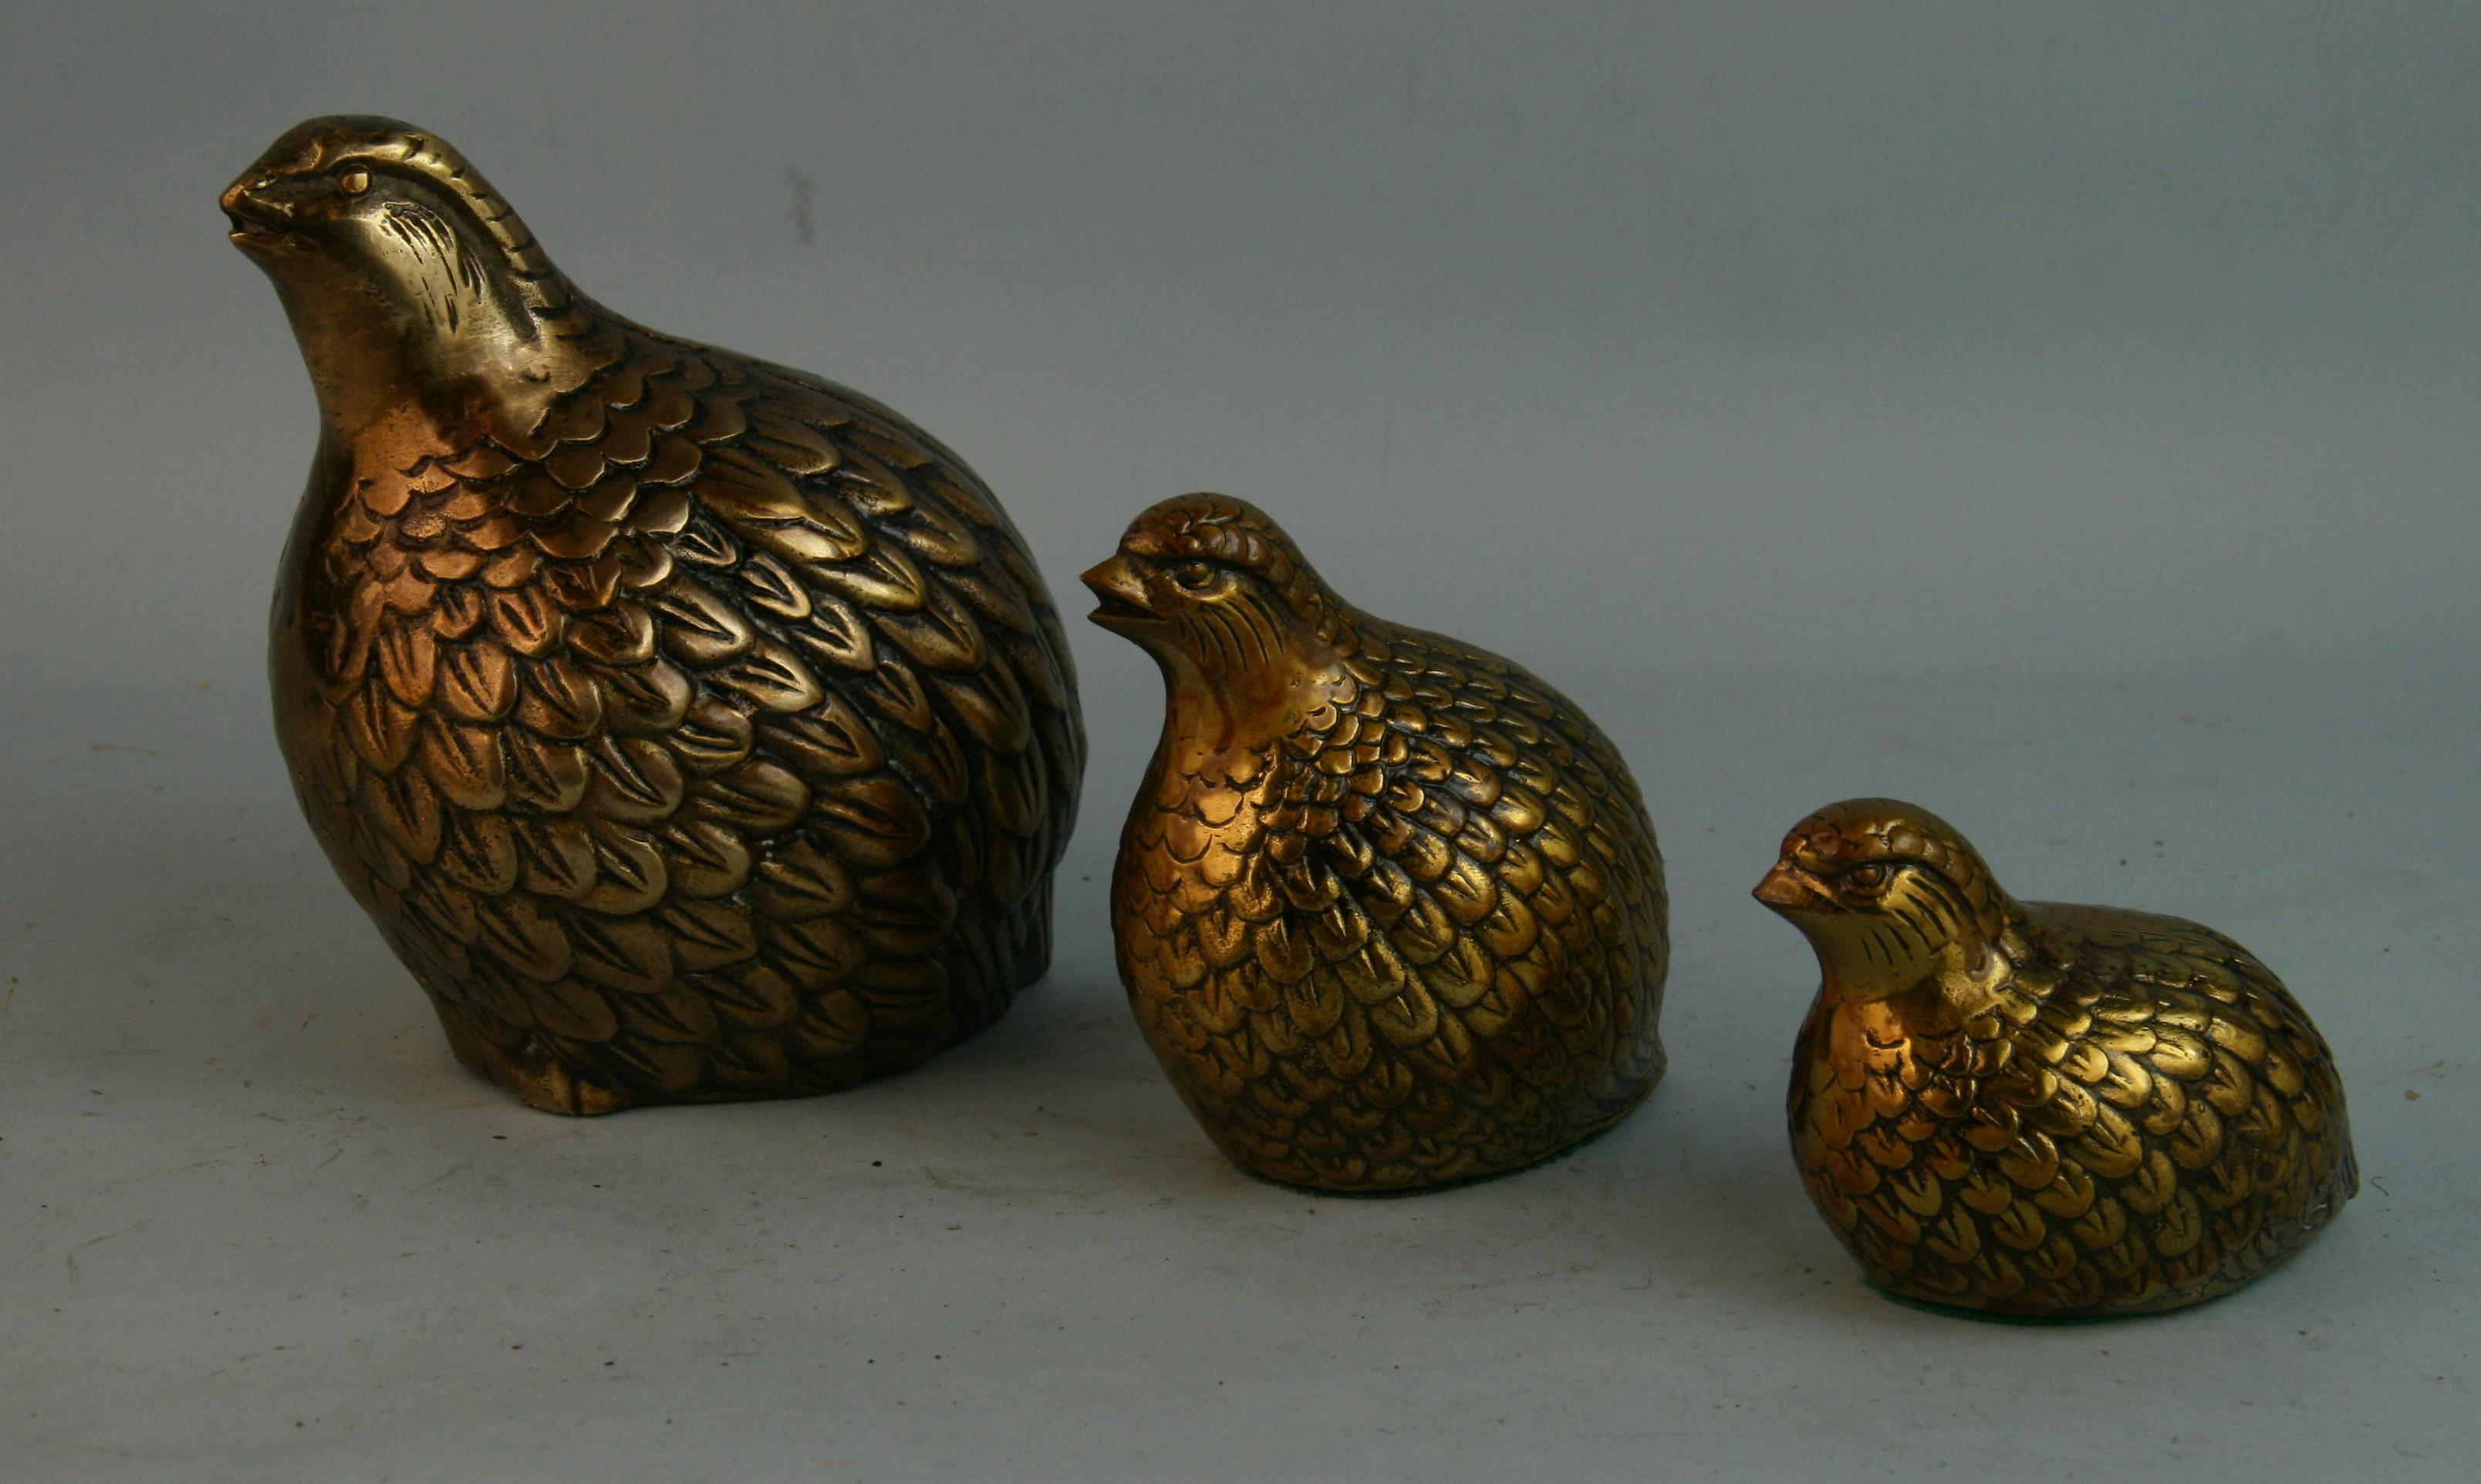 Beautiful family of 3 finely detailed Japanese brass quail sculptures.
An unusual opportunity to own a rare set of 3 brass quail sculptures
Size 4 x 5 x 6.5